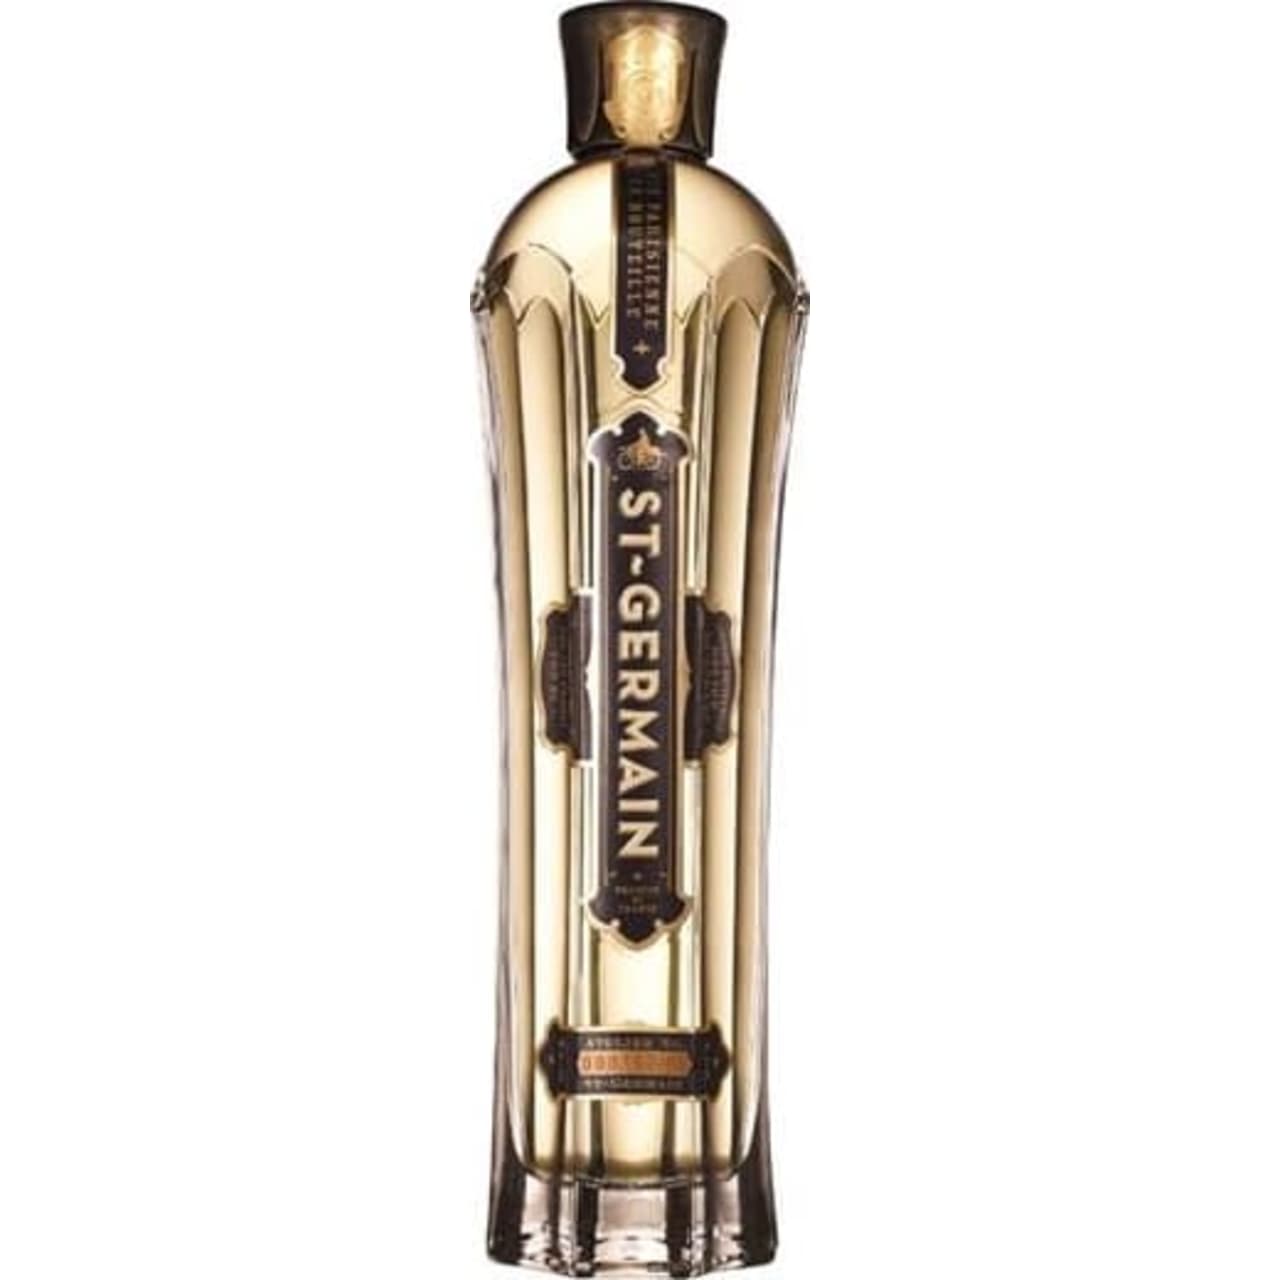 St-Germain is the world's first elderflower liqueur, produced only using freshly picked flowers.